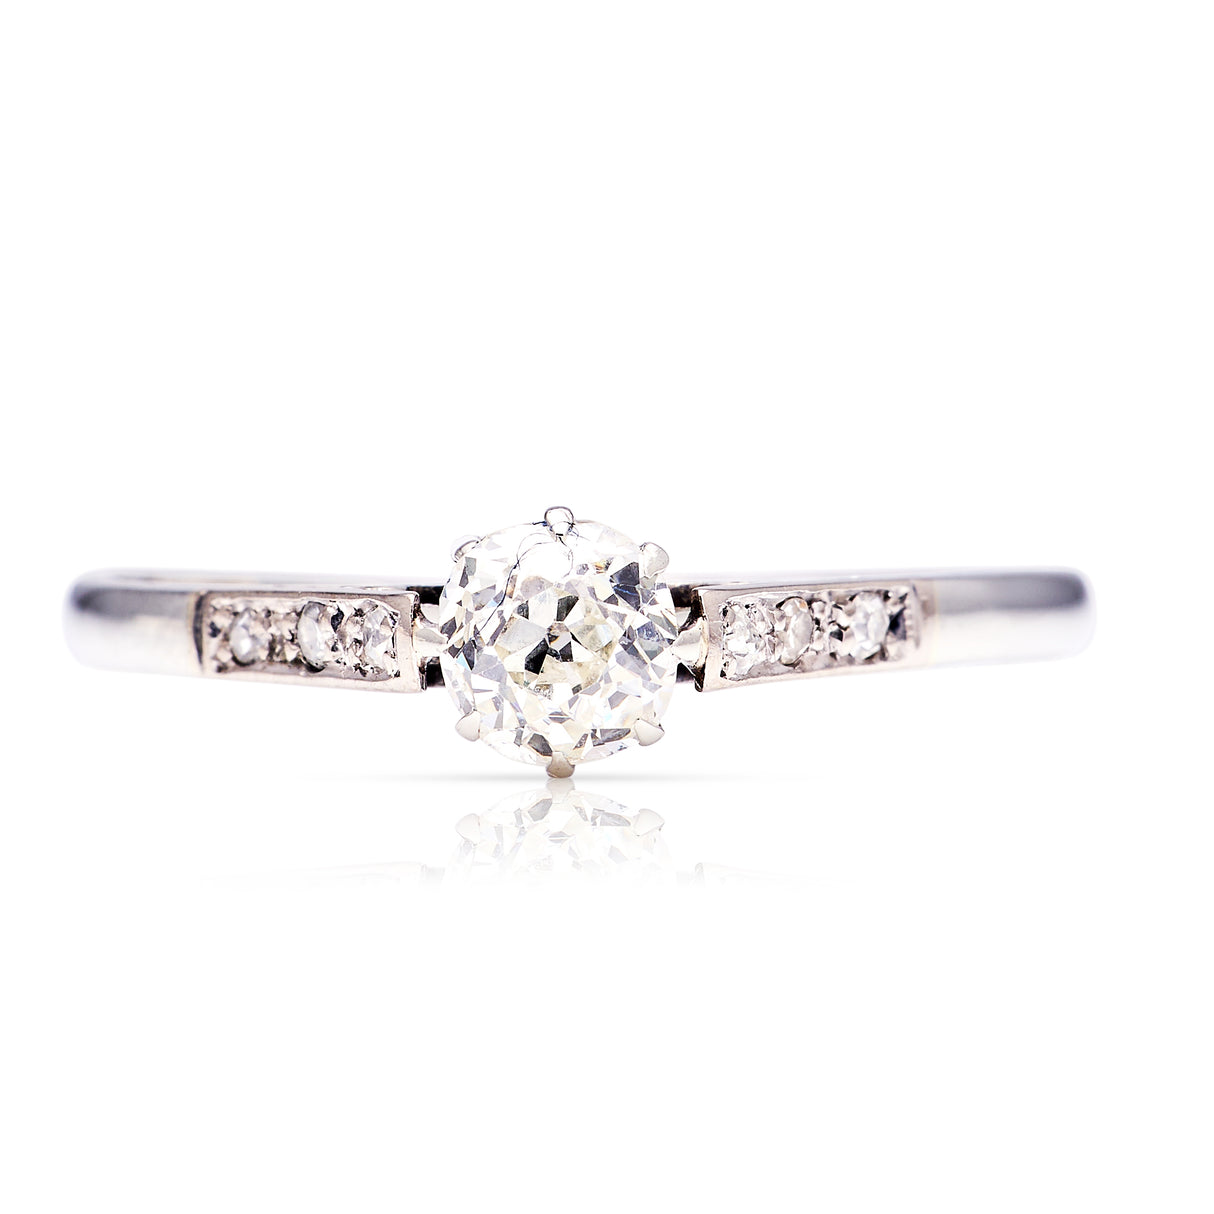 Antique, Edwardian solitaire diamond engagement ring, 18ct white gold and platinum